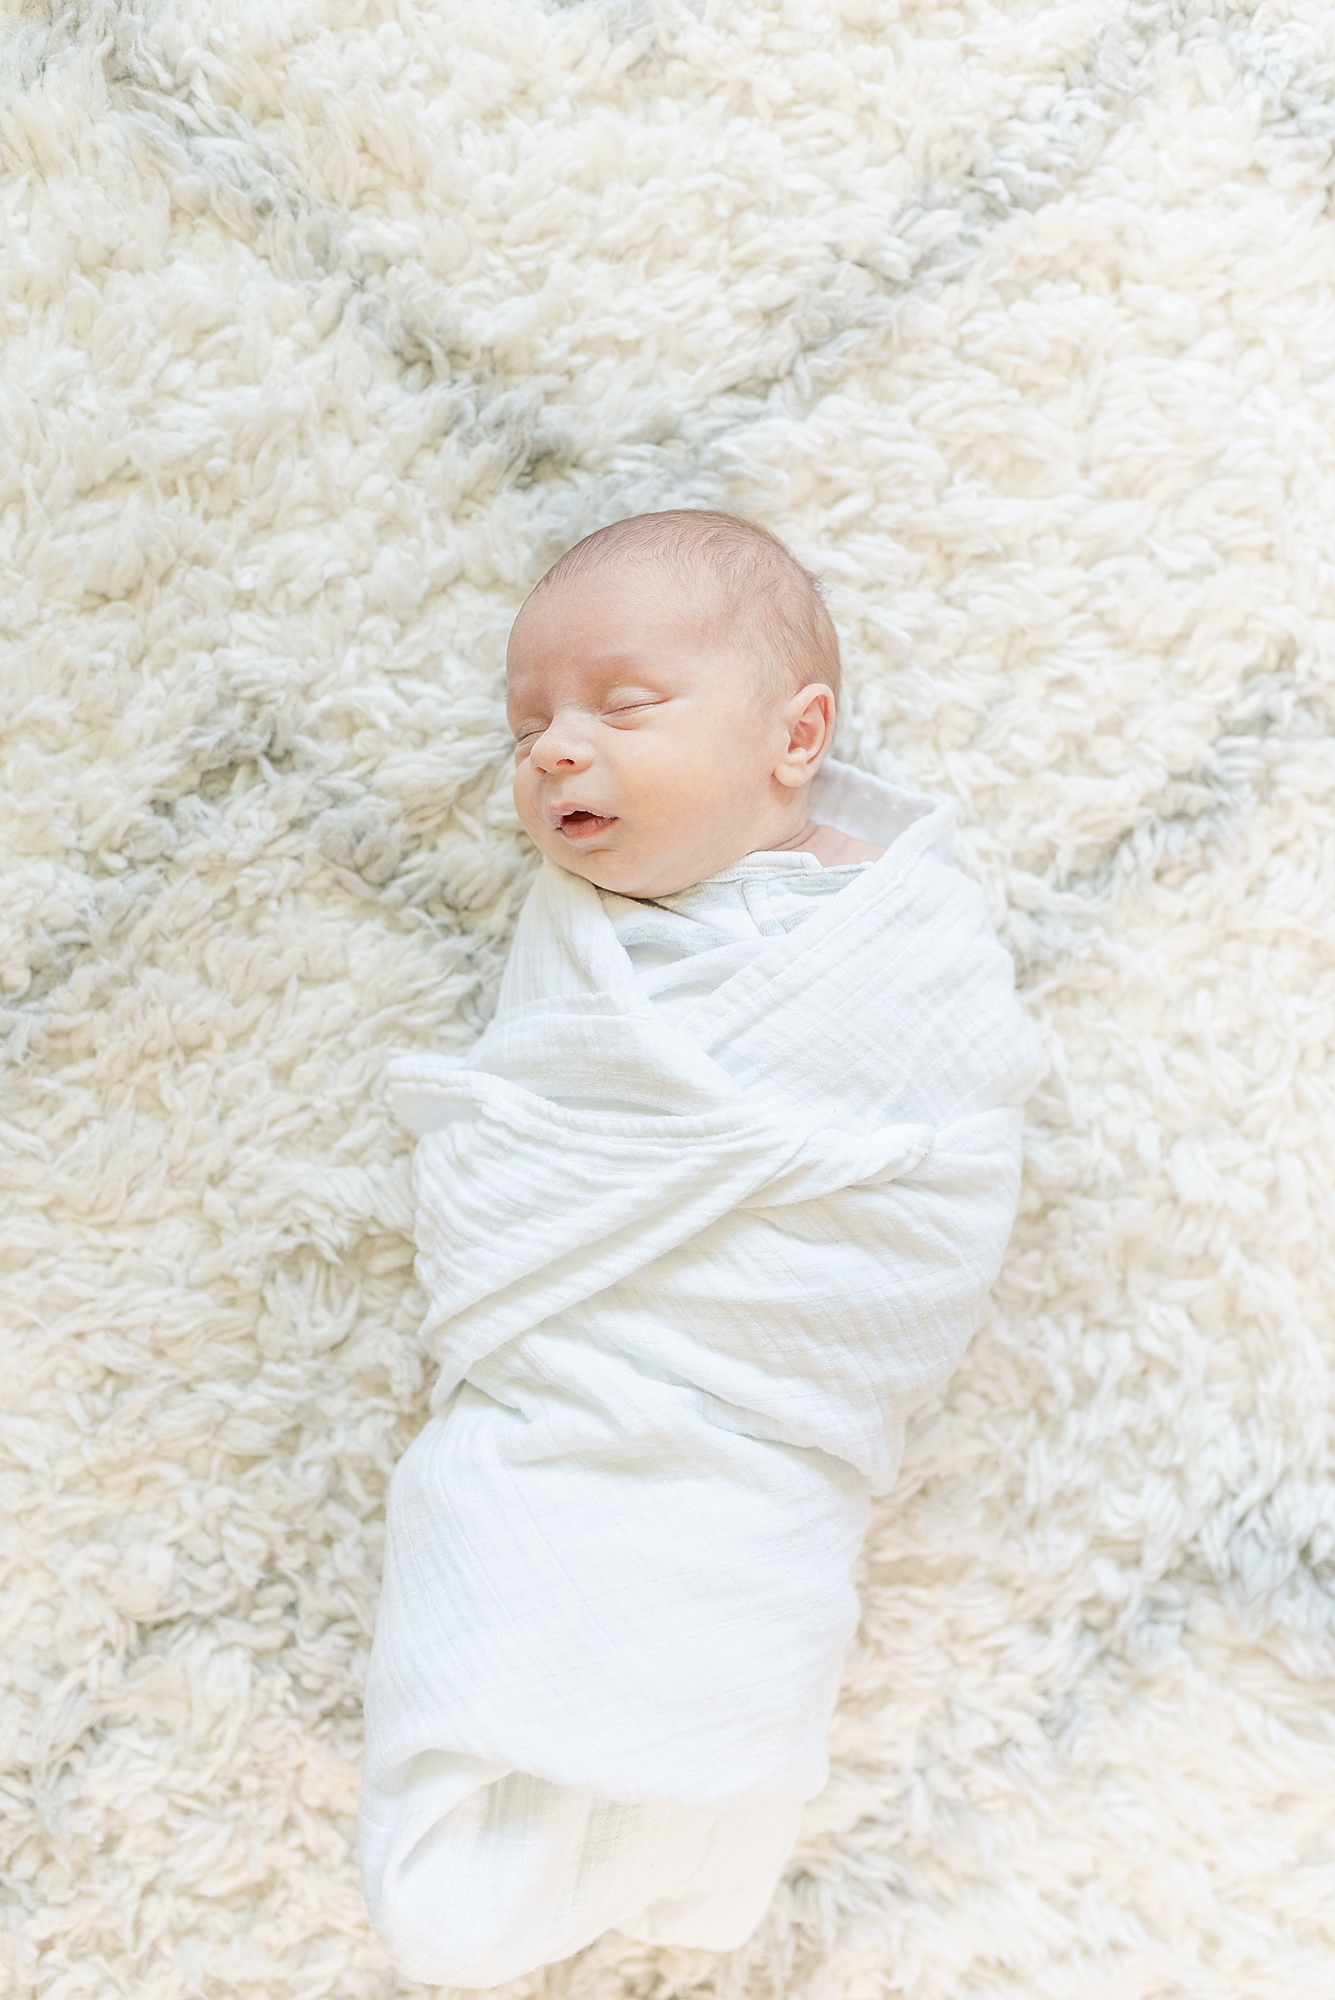 a newborn baby boy wrapped in a white swaddle while laying on a rug by nashville family photographer dolly delong photography